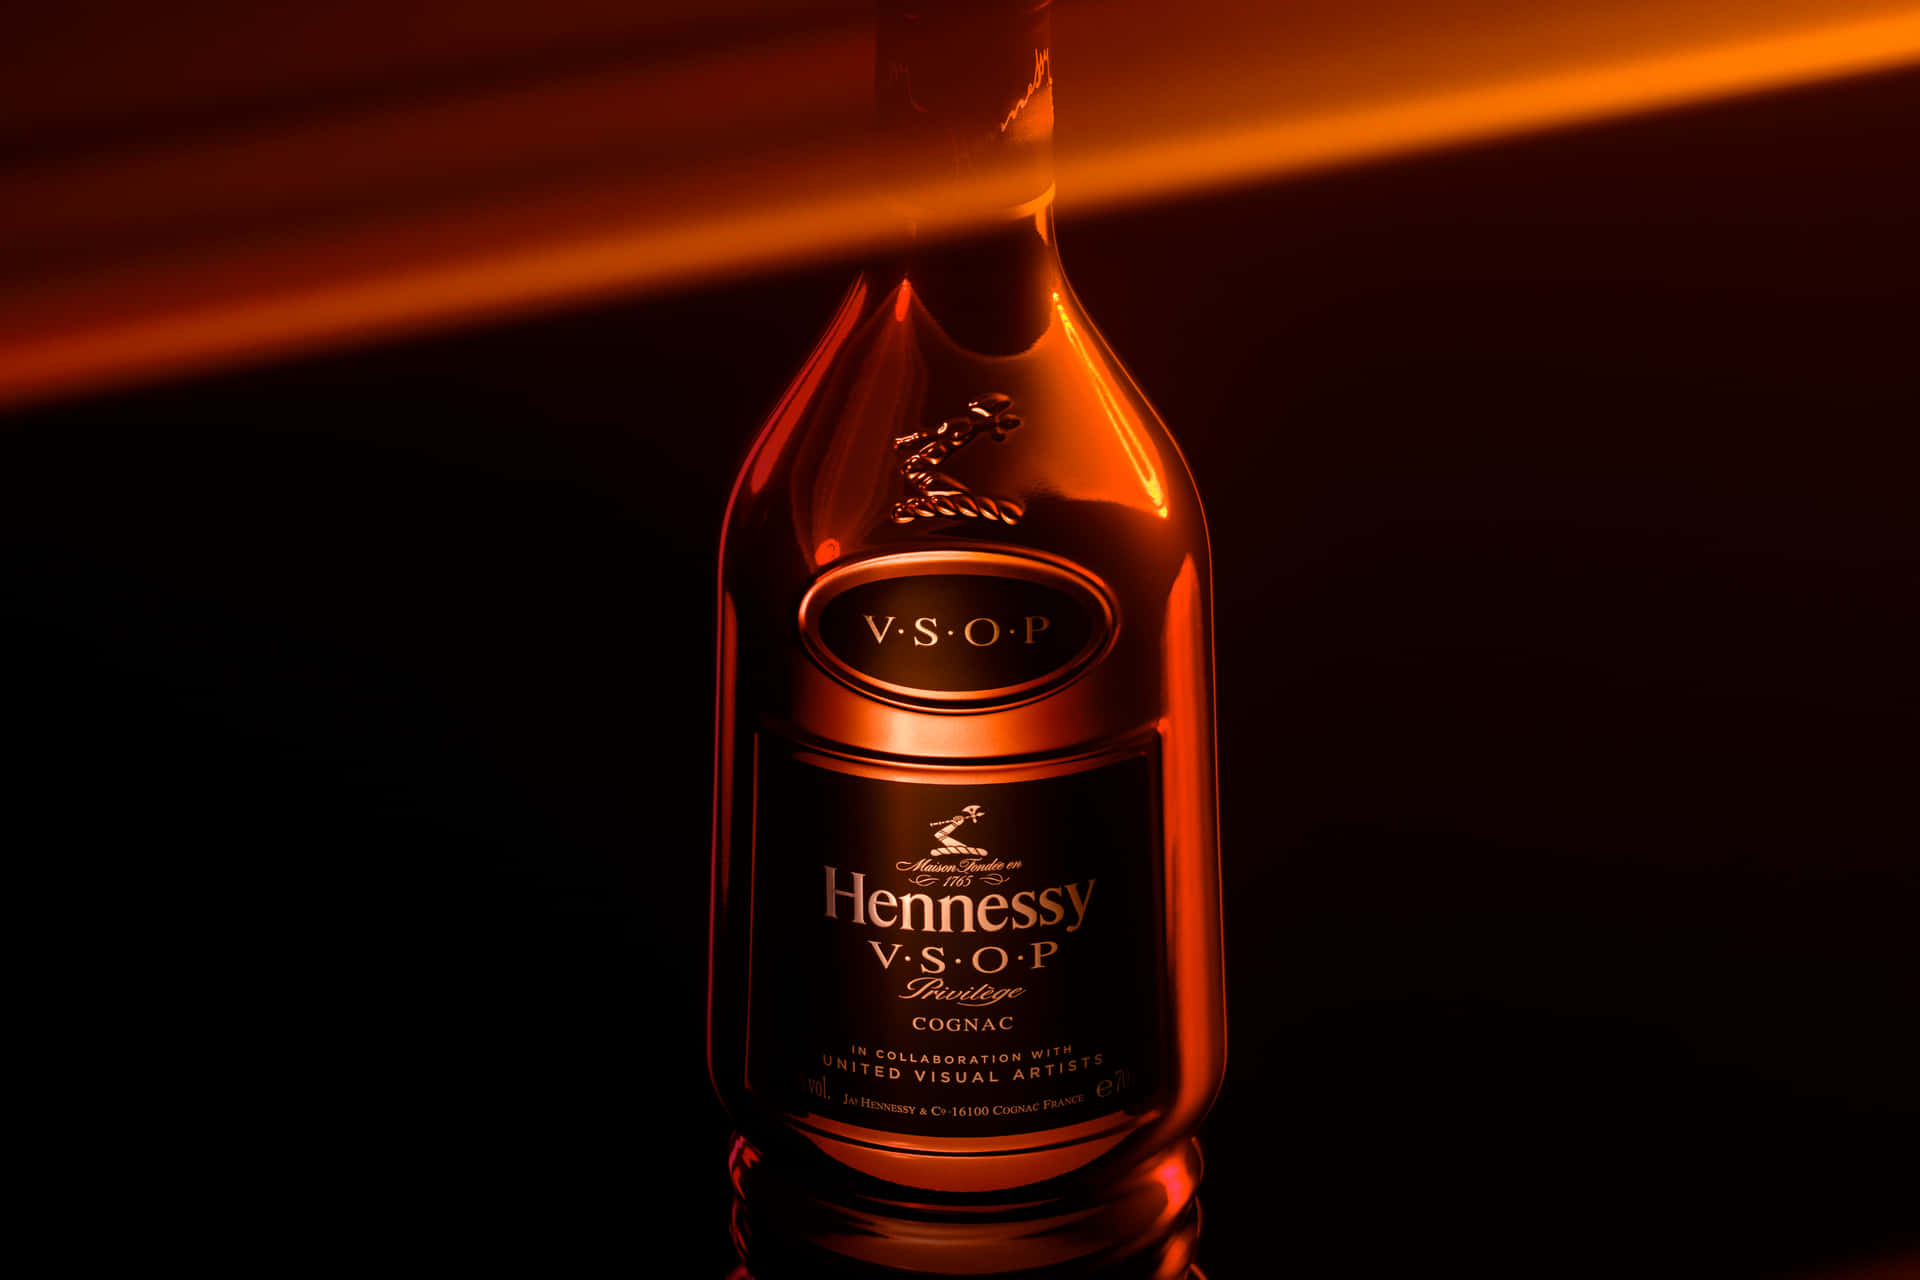 A Bottle Of Henry Scotch Is Shown On A Dark Background Wallpaper